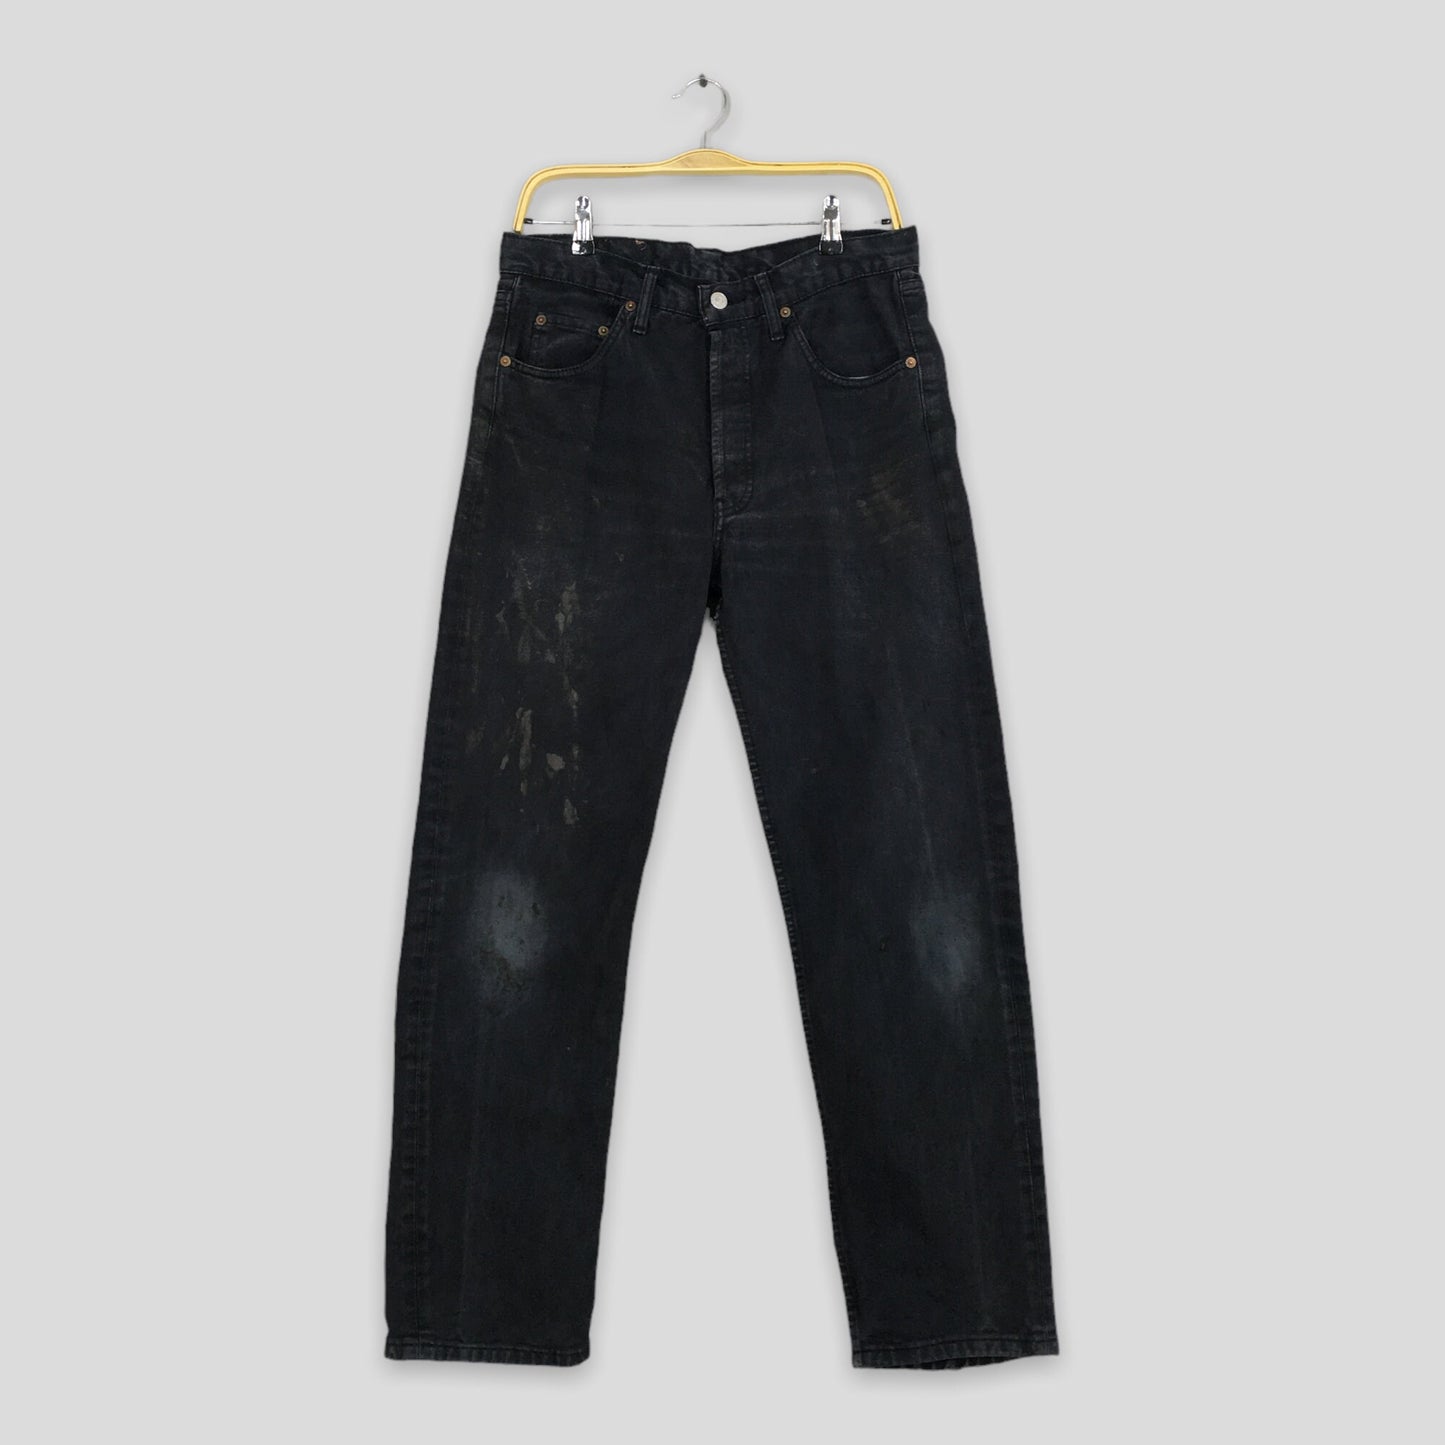 Levi's 501 Faded Dirty Black Jeans Size 32x29.5